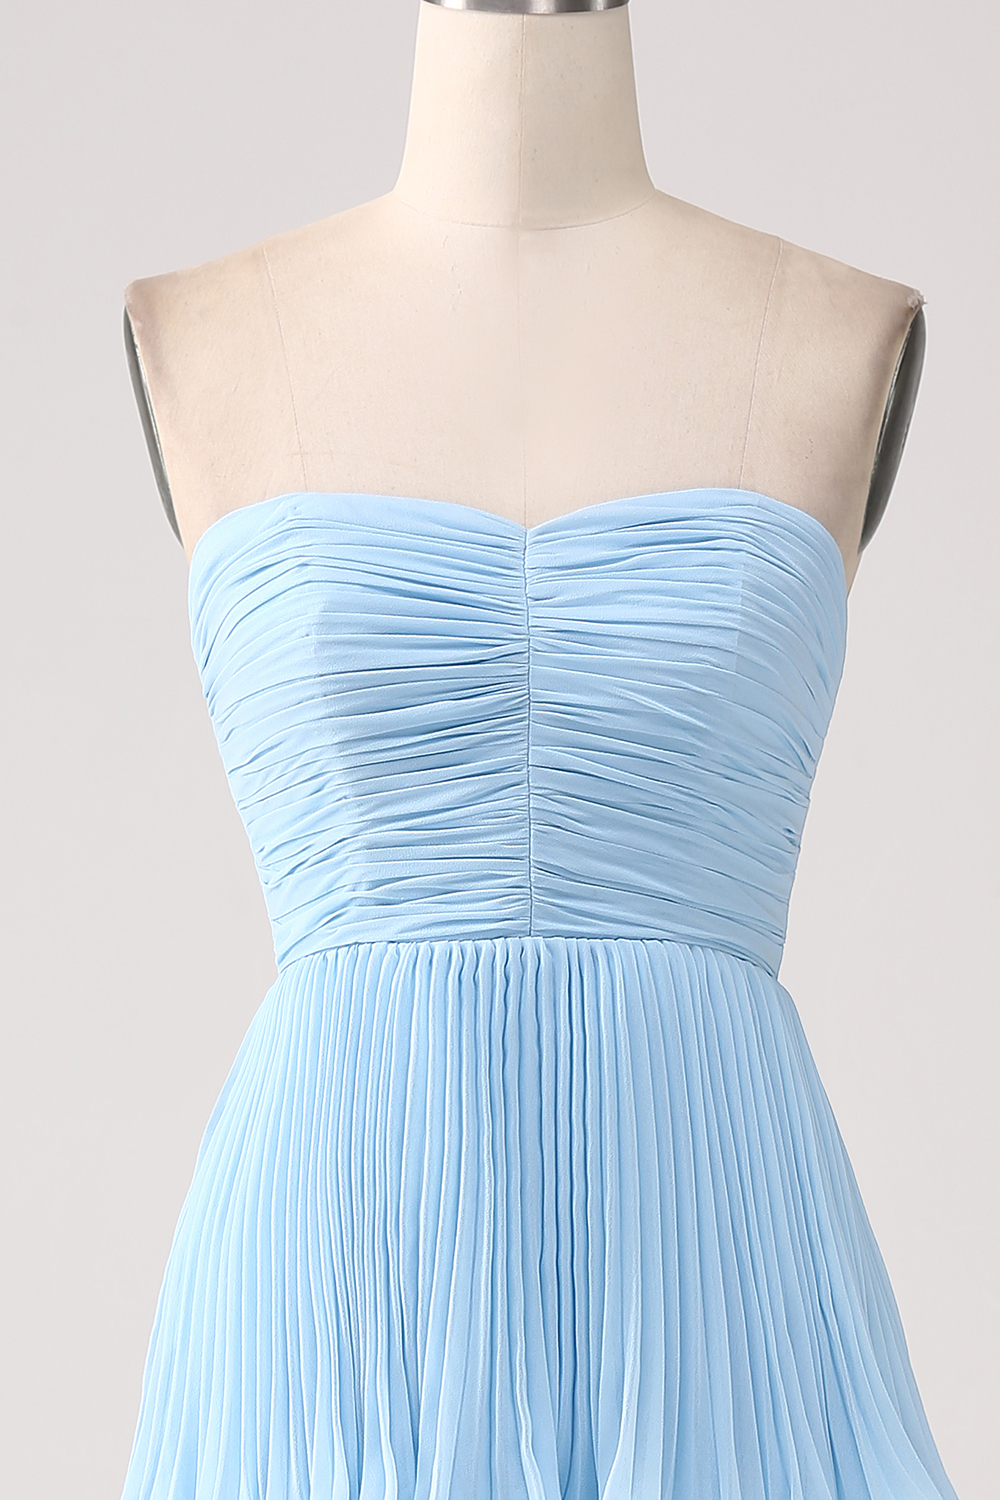 Sky Blue Strapless Tiered Long Bridesmaid Dress